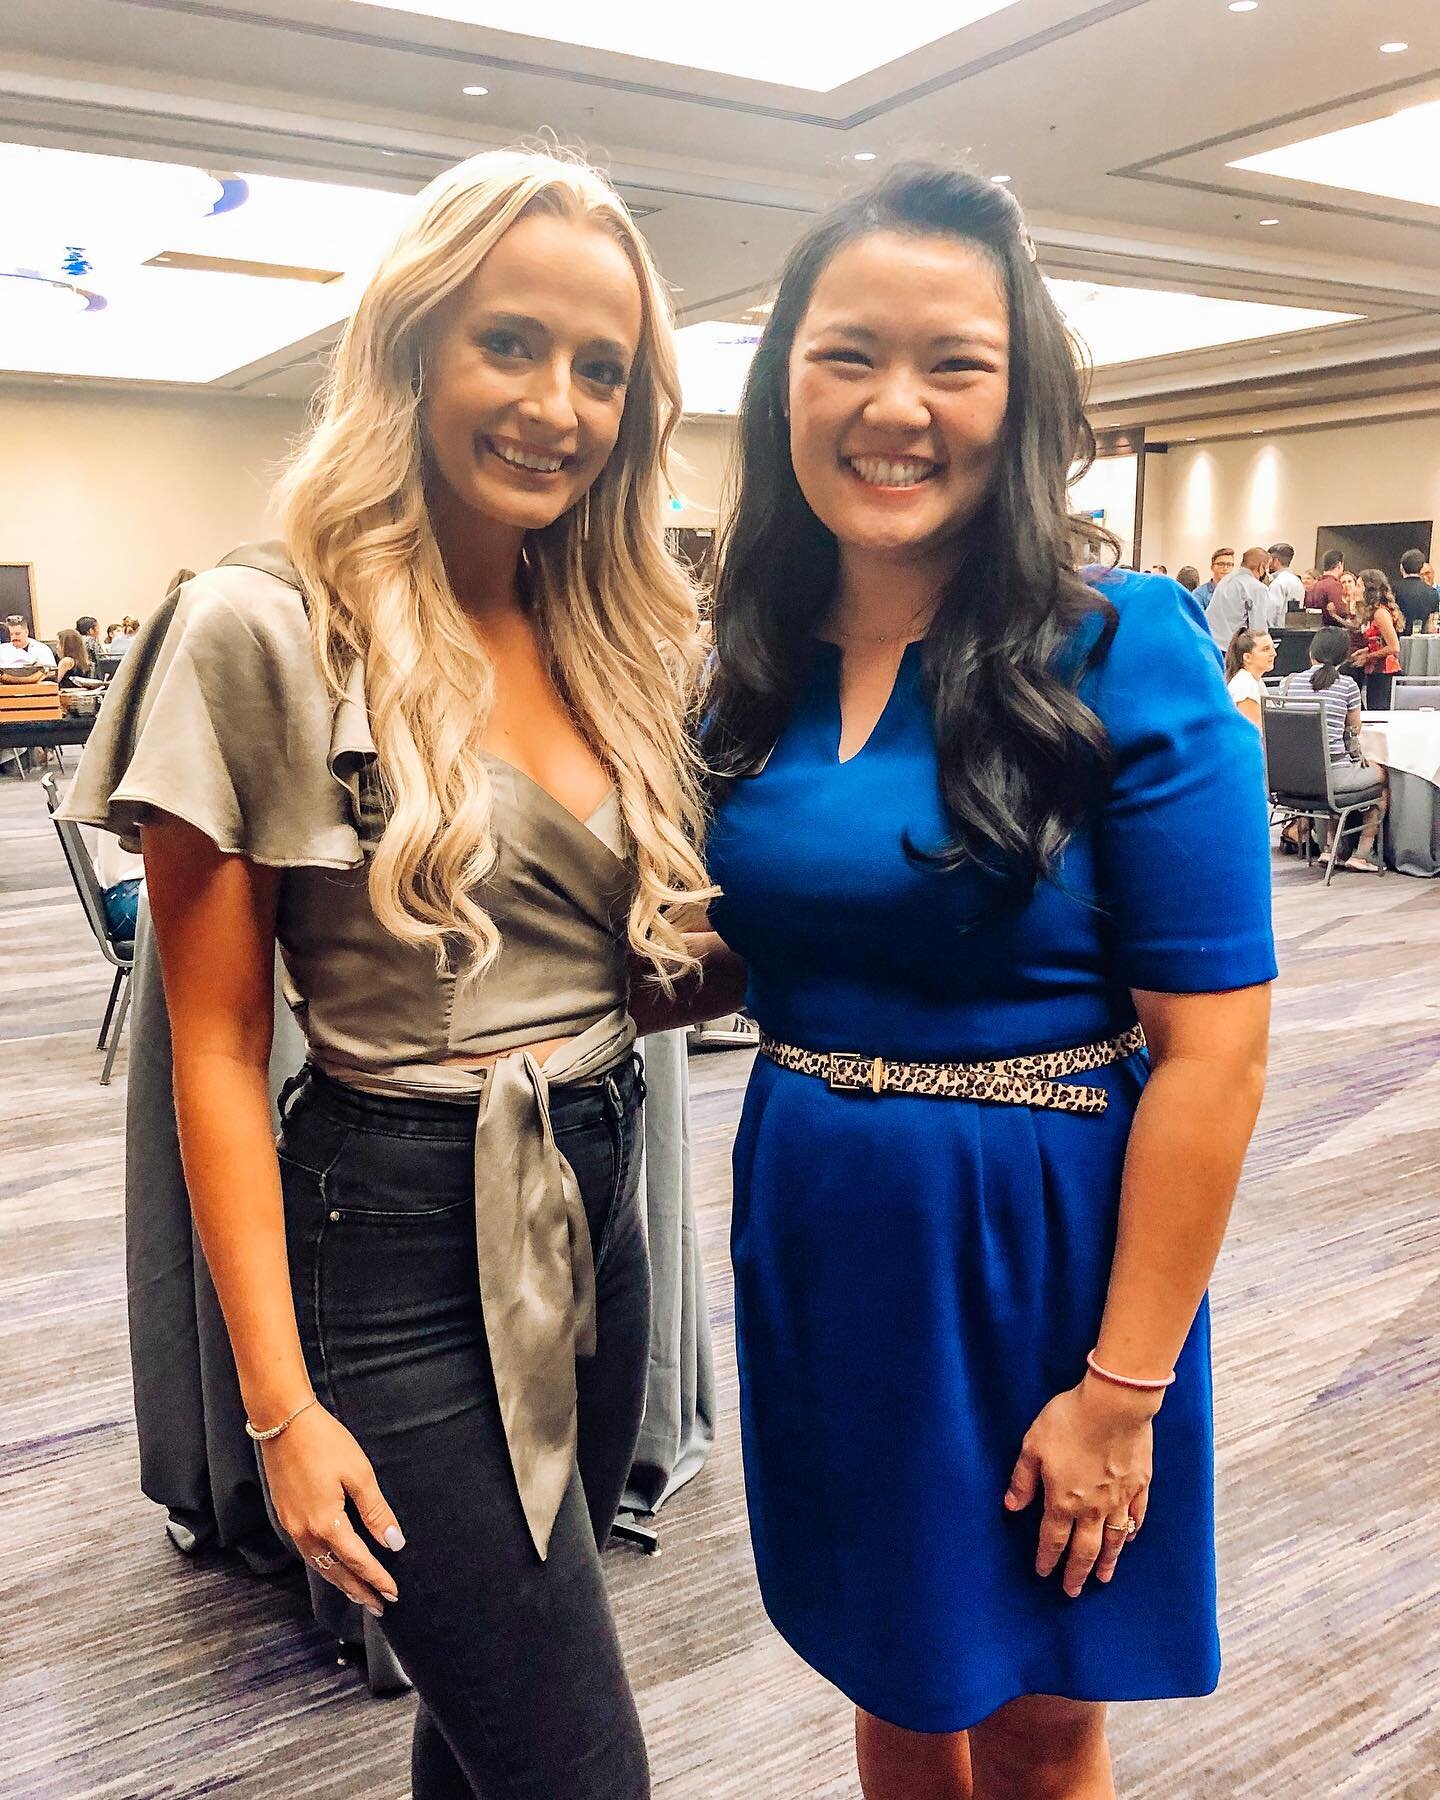 These past two days I had the opportunity to return to @sandradayoconnorcollegeoflaw for their orientation and student mixer to talk about my experience in my masters program! I am so thankful to @missamerica for providing me the scholarship dollars 